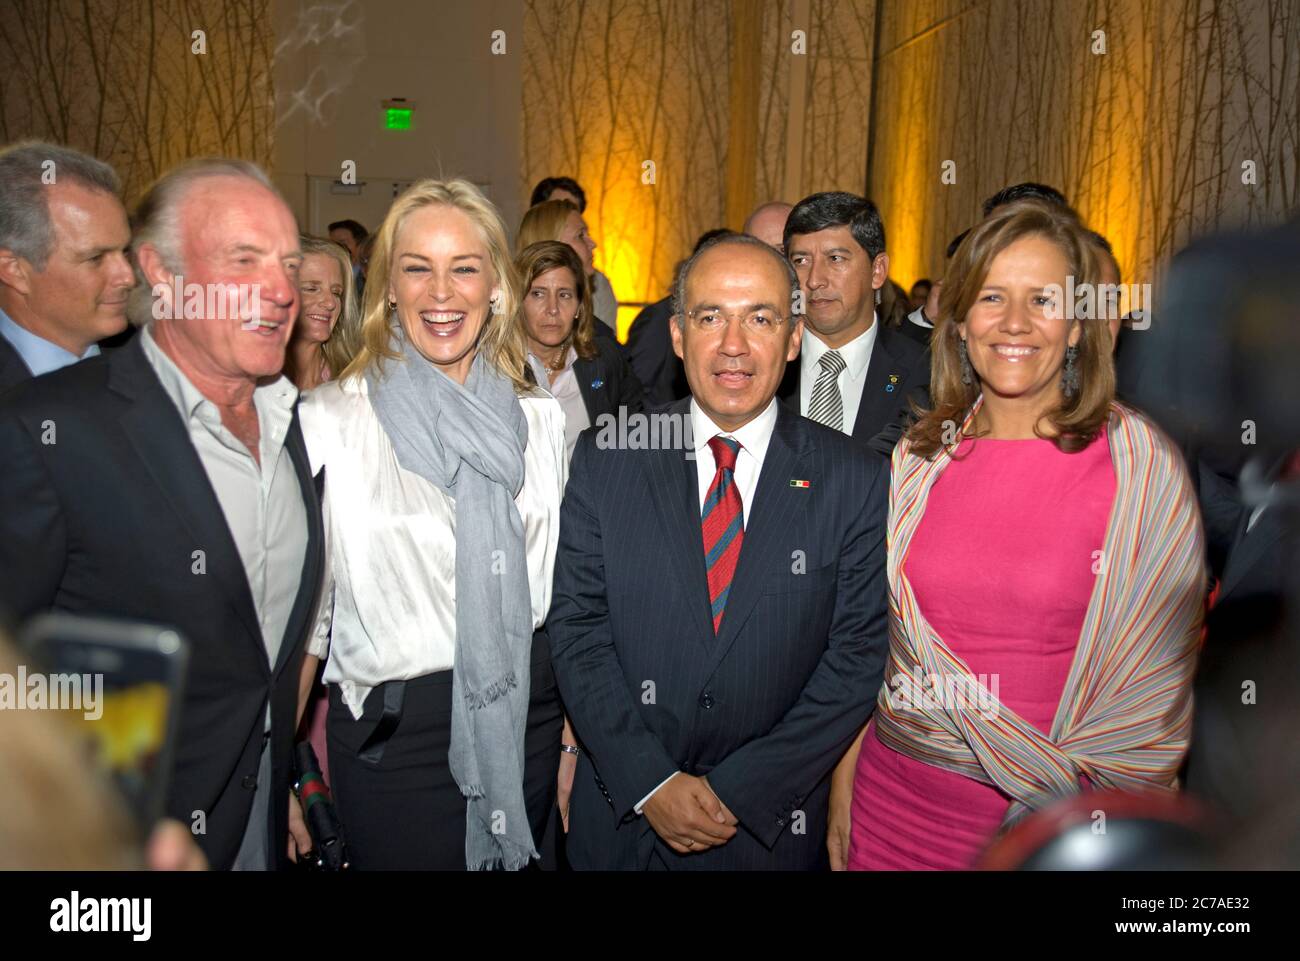 President Felipe Calderon of Mexico and wife Margarita Zavala attending the premiere party for Mexico The Royal Tour in downtown Los Angeles with Sharon Stone and James Caan Stock Photo